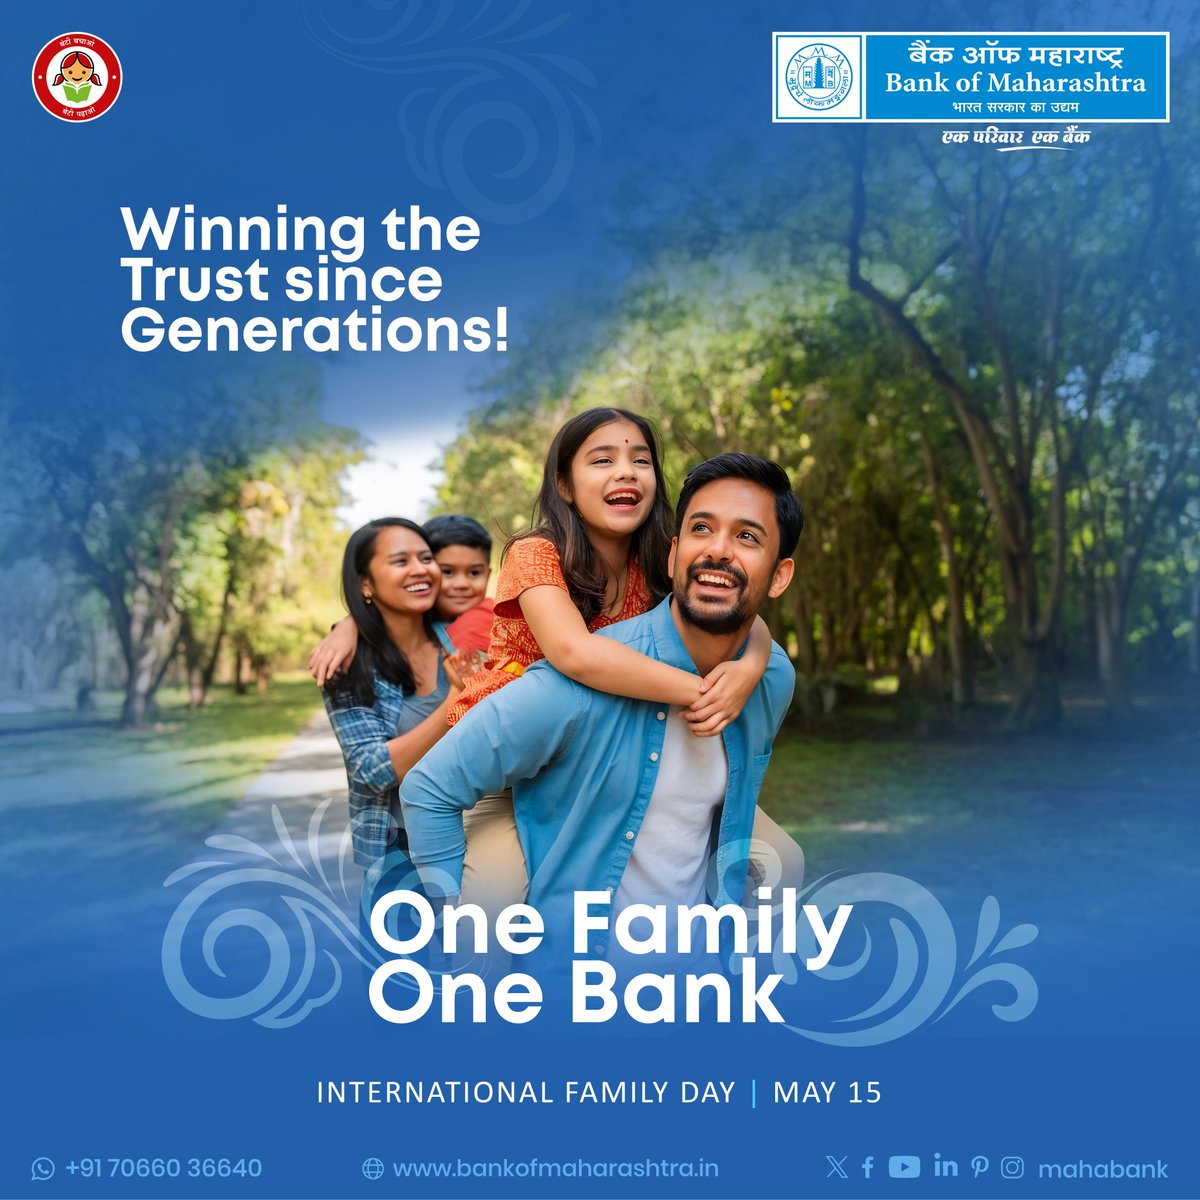 Join us in celebrating the essence of togetherness with Bank of Maharashtra! This International Family Day, let's come together and strengthen our bond as One Family, One Bank.

#BankofMaharashtra #Mahabank #InternationalFamilyDay #FamilyDay